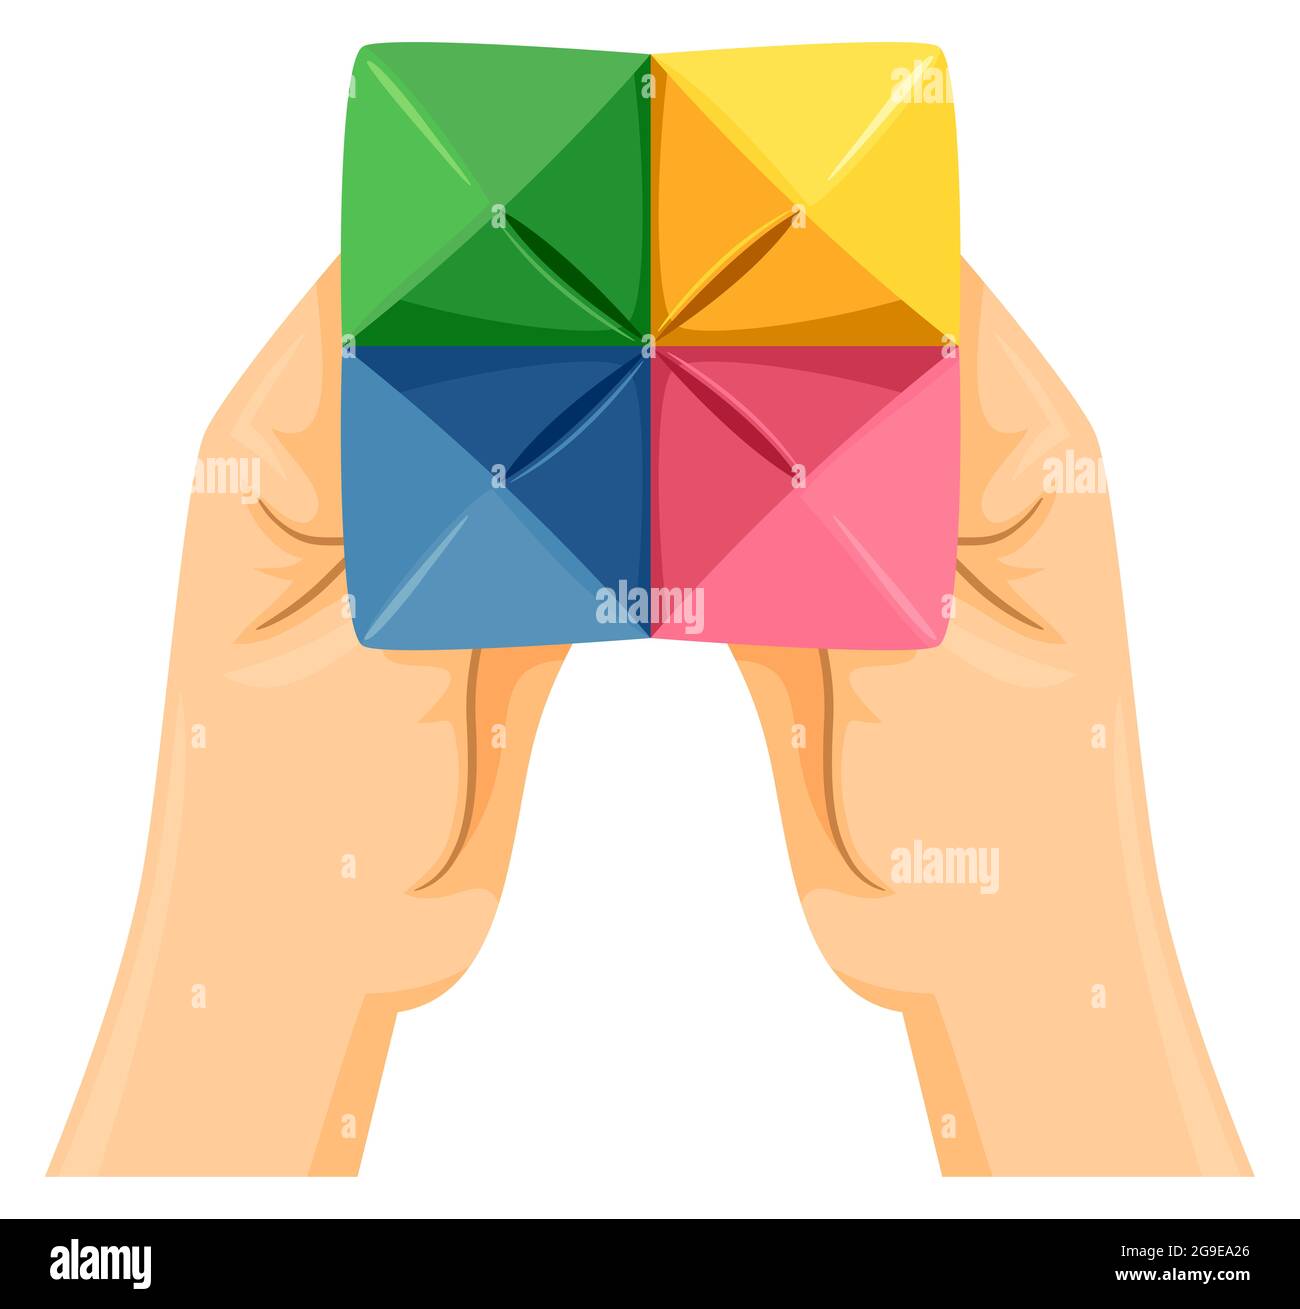 Illustration of Hands Holding a Paper Fortune Teller In Different Colors  Stock Photo - Alamy